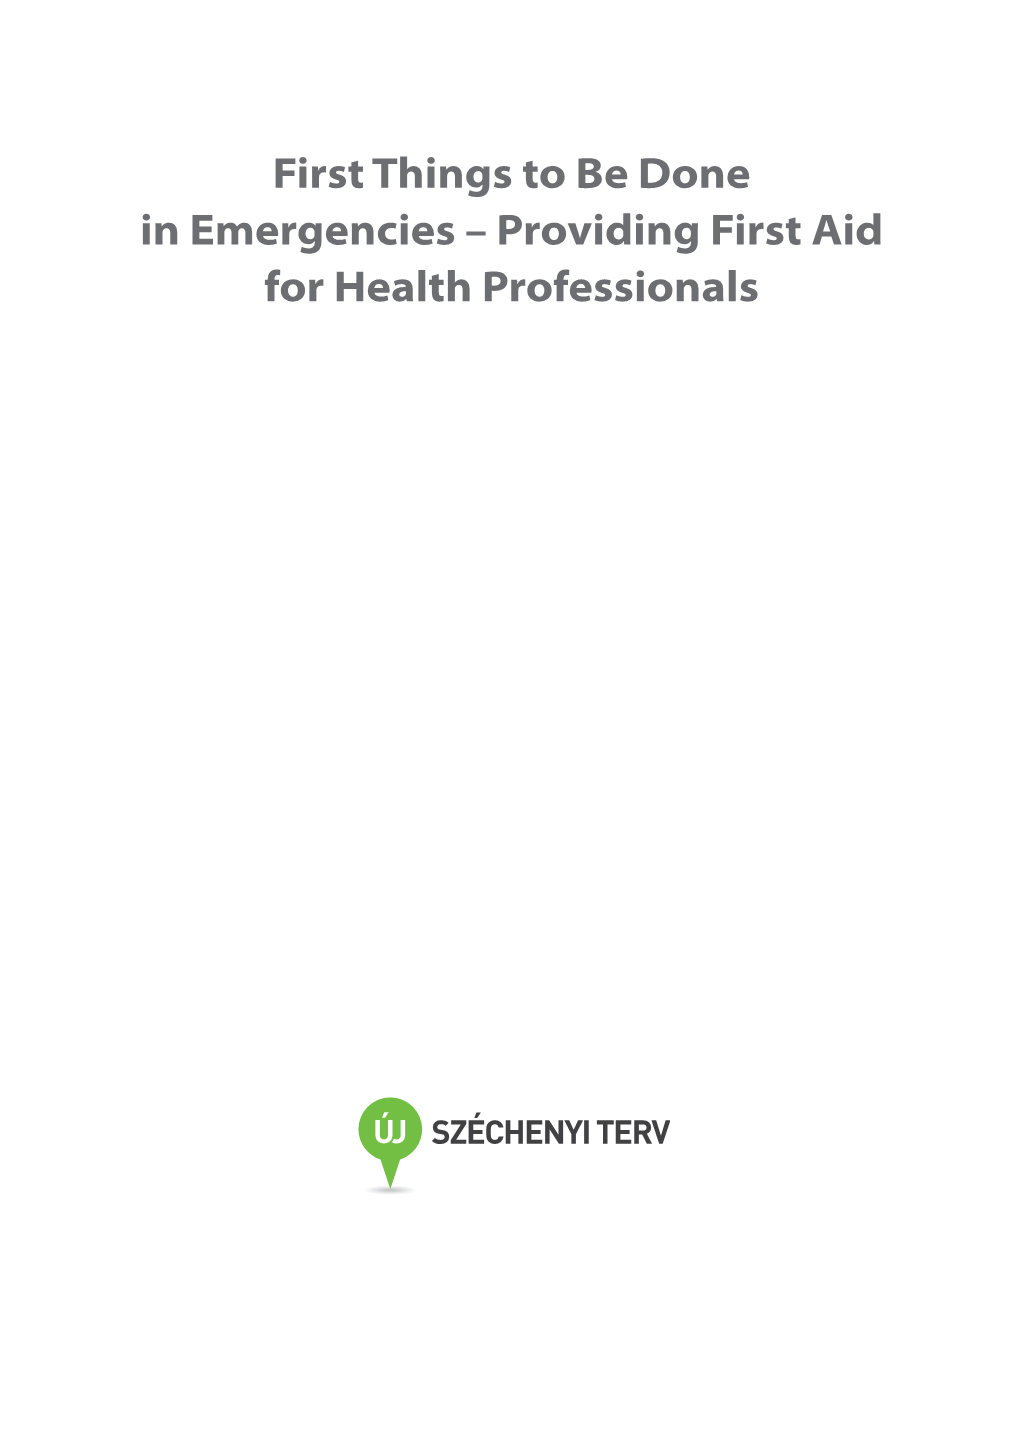 First Things to Be Done in Emergencies – Providing First Aid